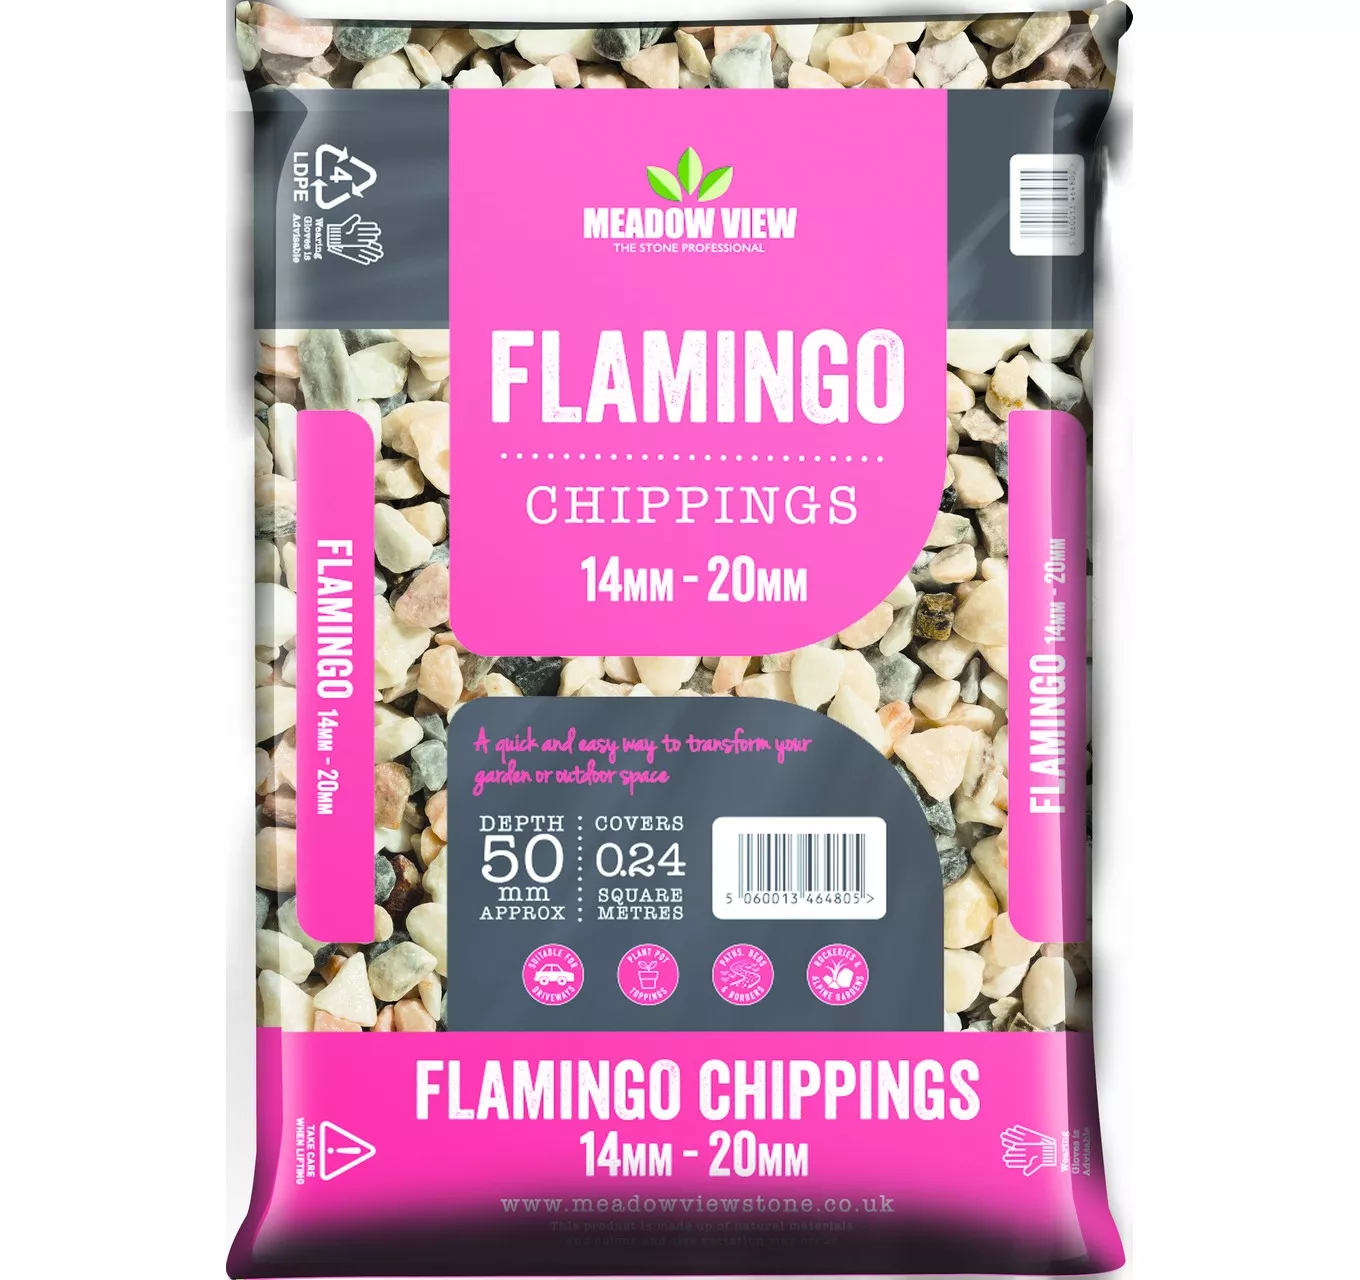 Flamingo Chippings 20mm 20kg